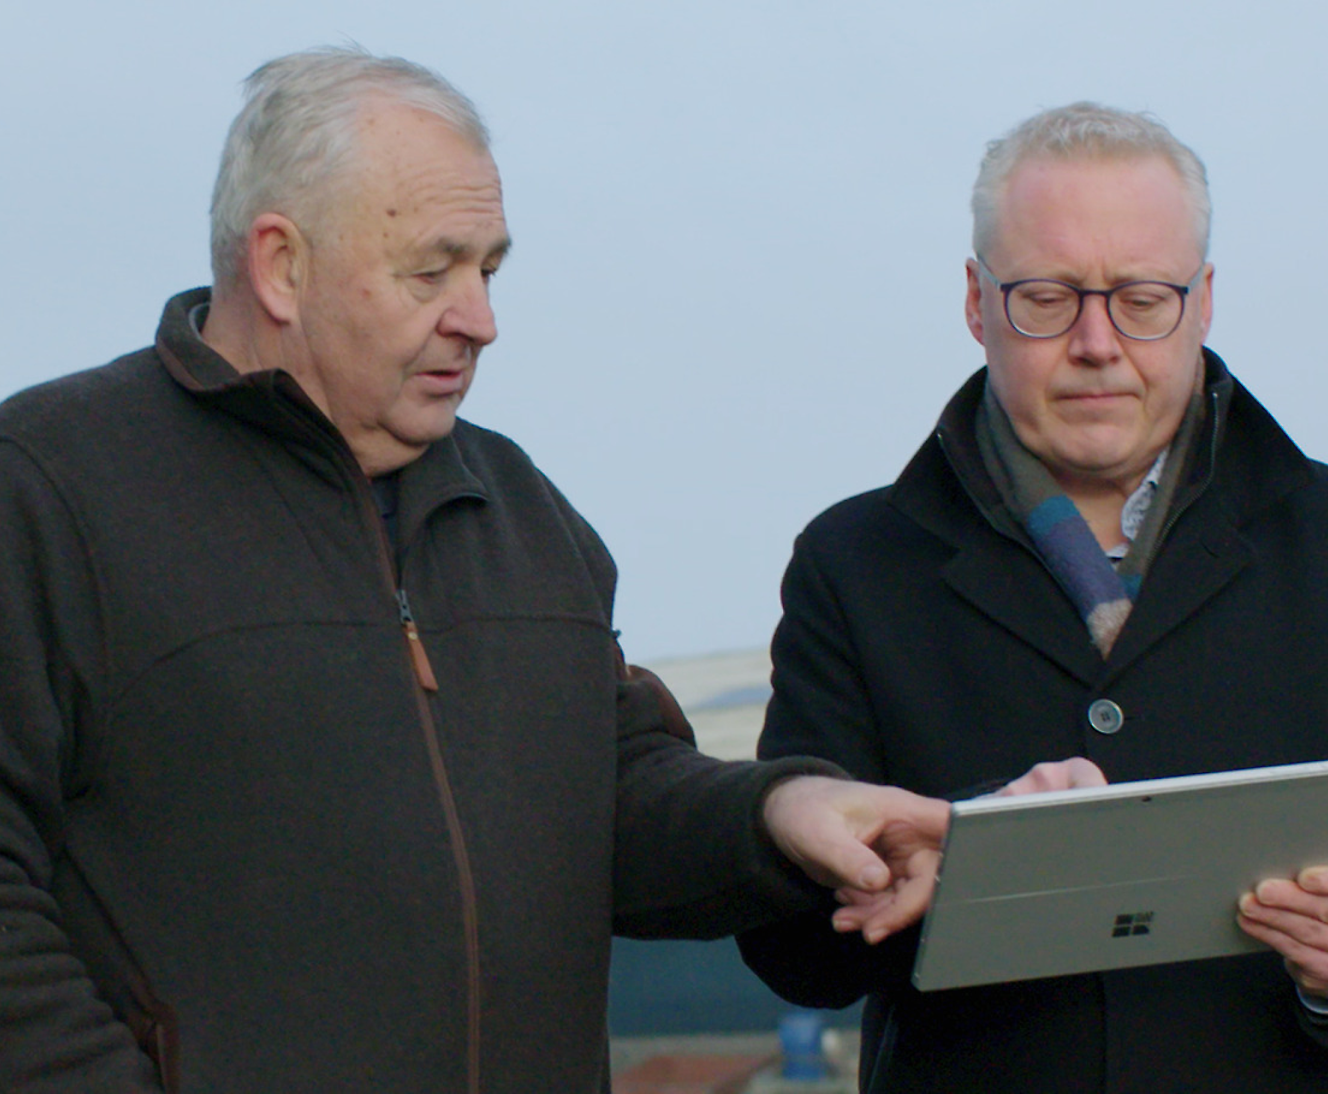 Two individuals stand outdoors, with one man using a tablet while the other points at the screen.